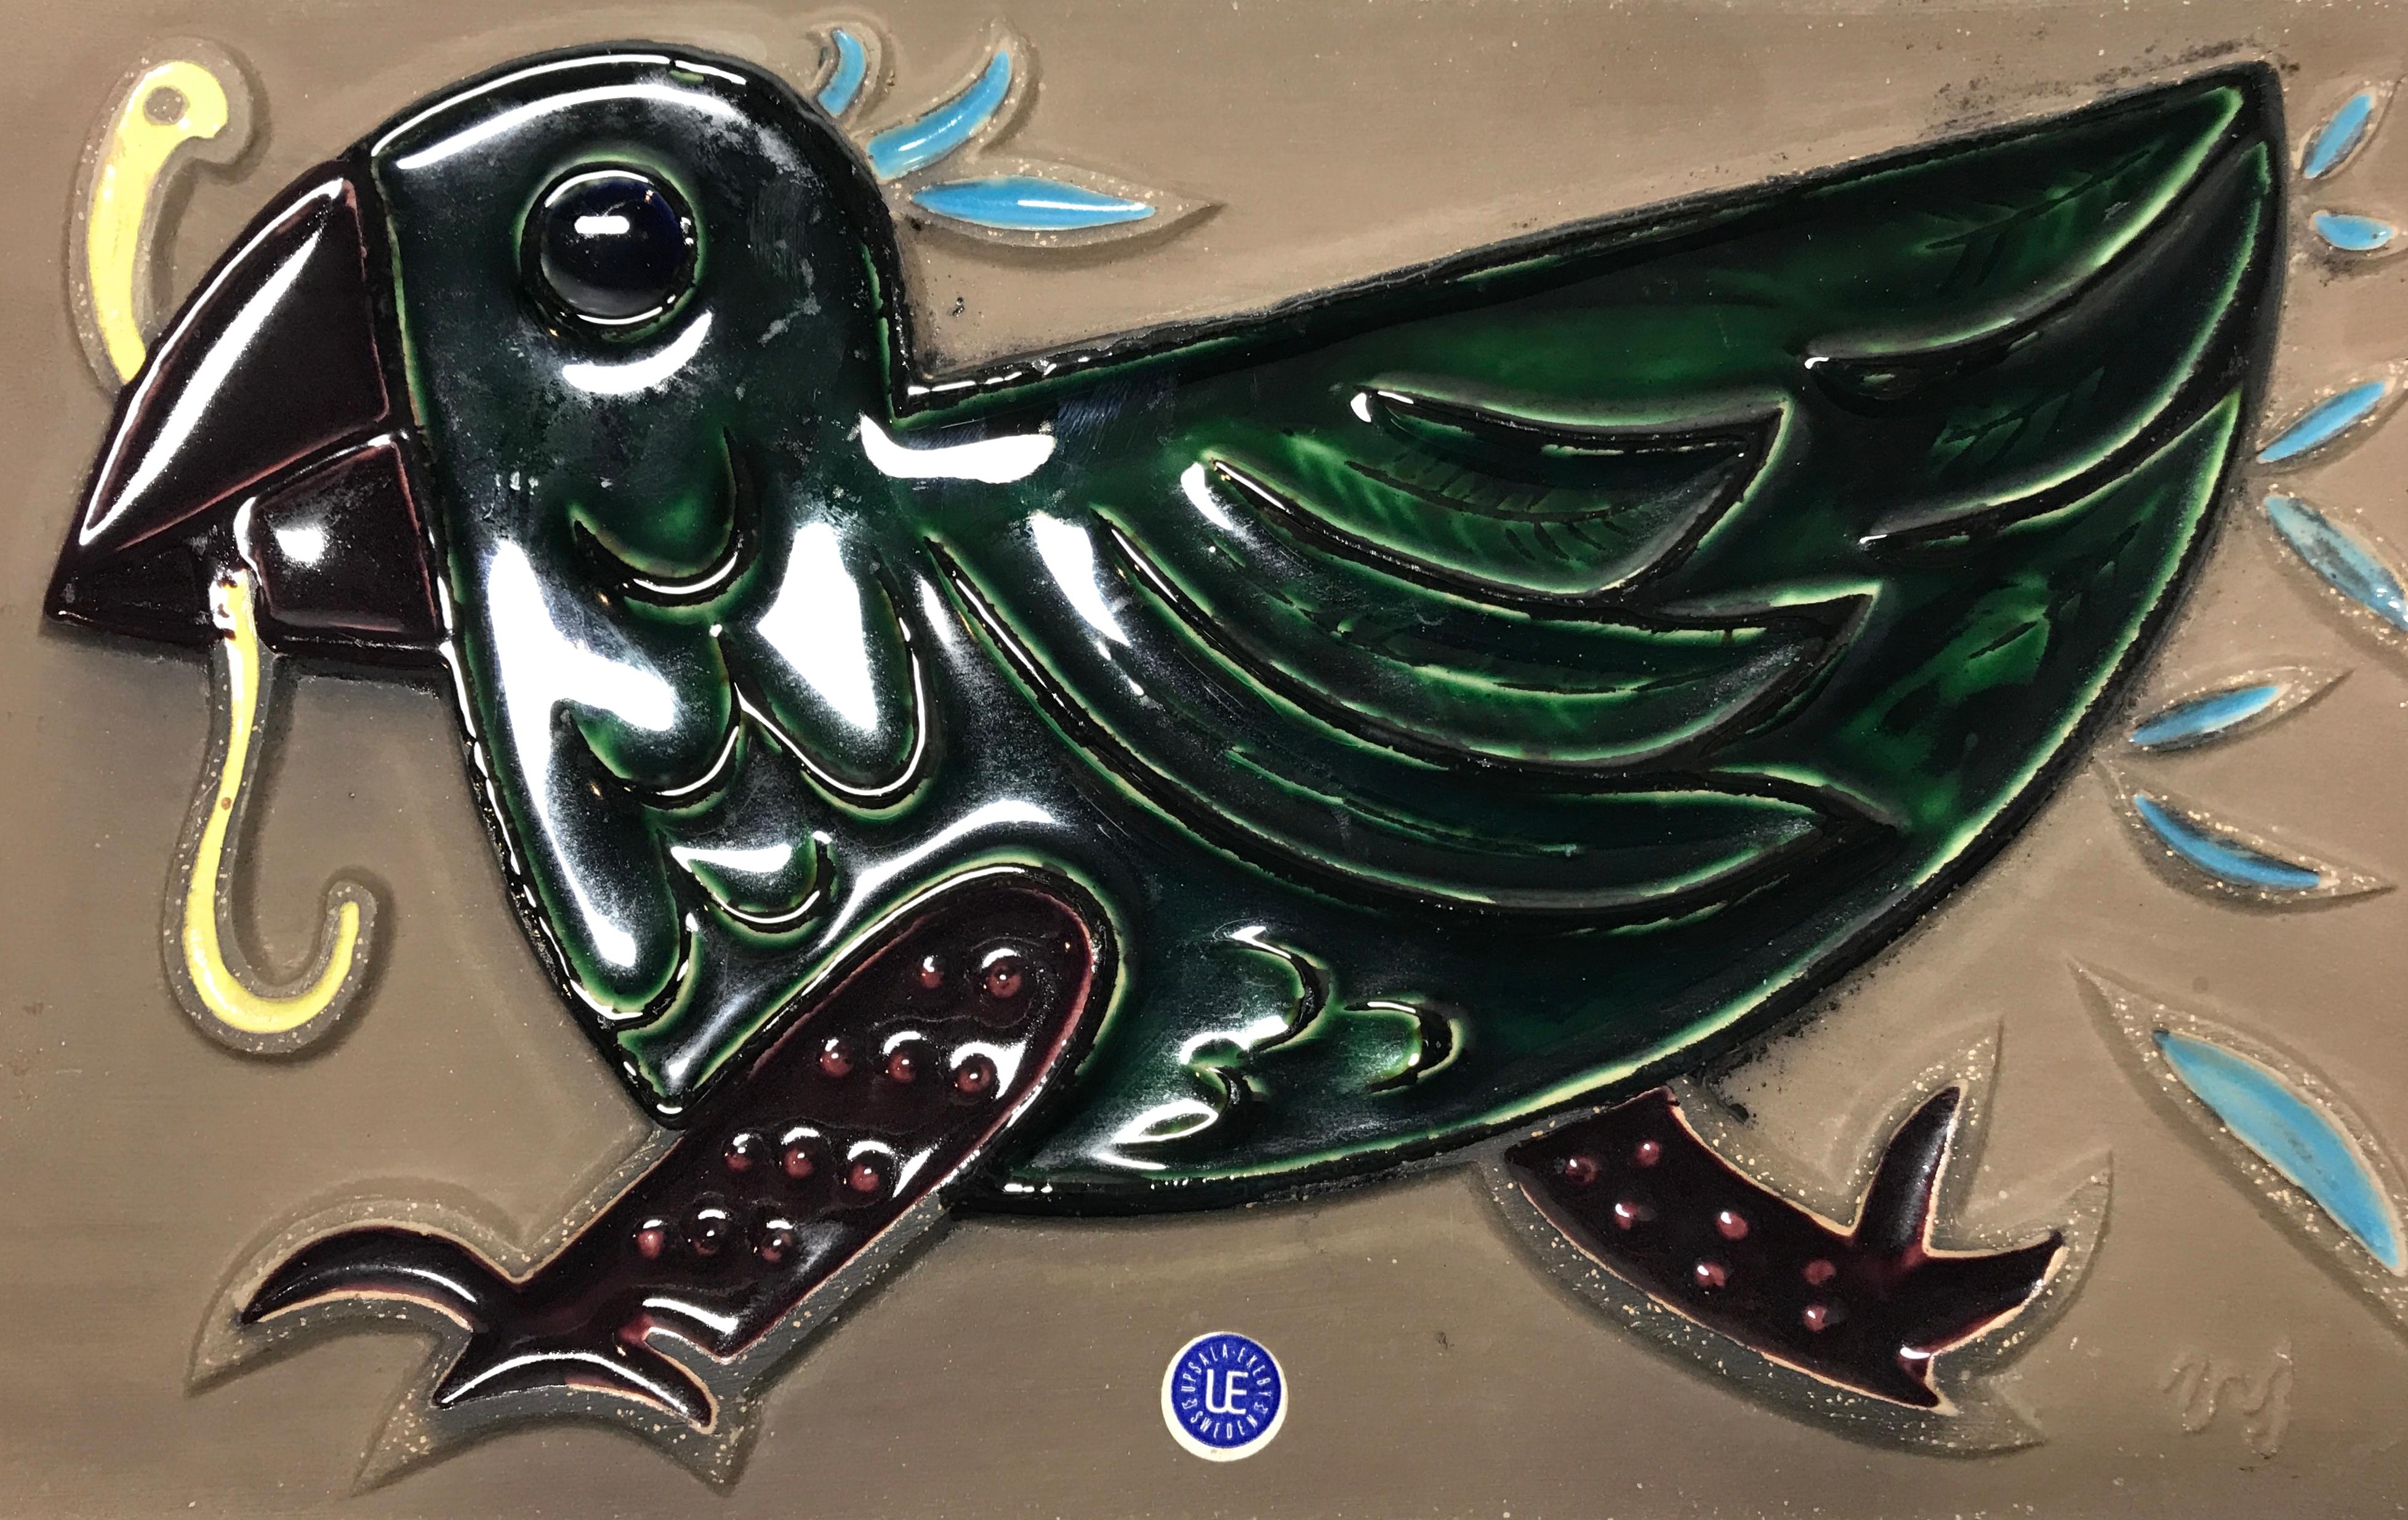 Delightful and fun, vintage ceramic wall plaque of an 'early bird who has caught the worm', by illustrious designer Mari Simmulson for Upsala Ekeby, Sweden
Decorated predominantly with a rich dark green enamel glaze in relief, on a matte